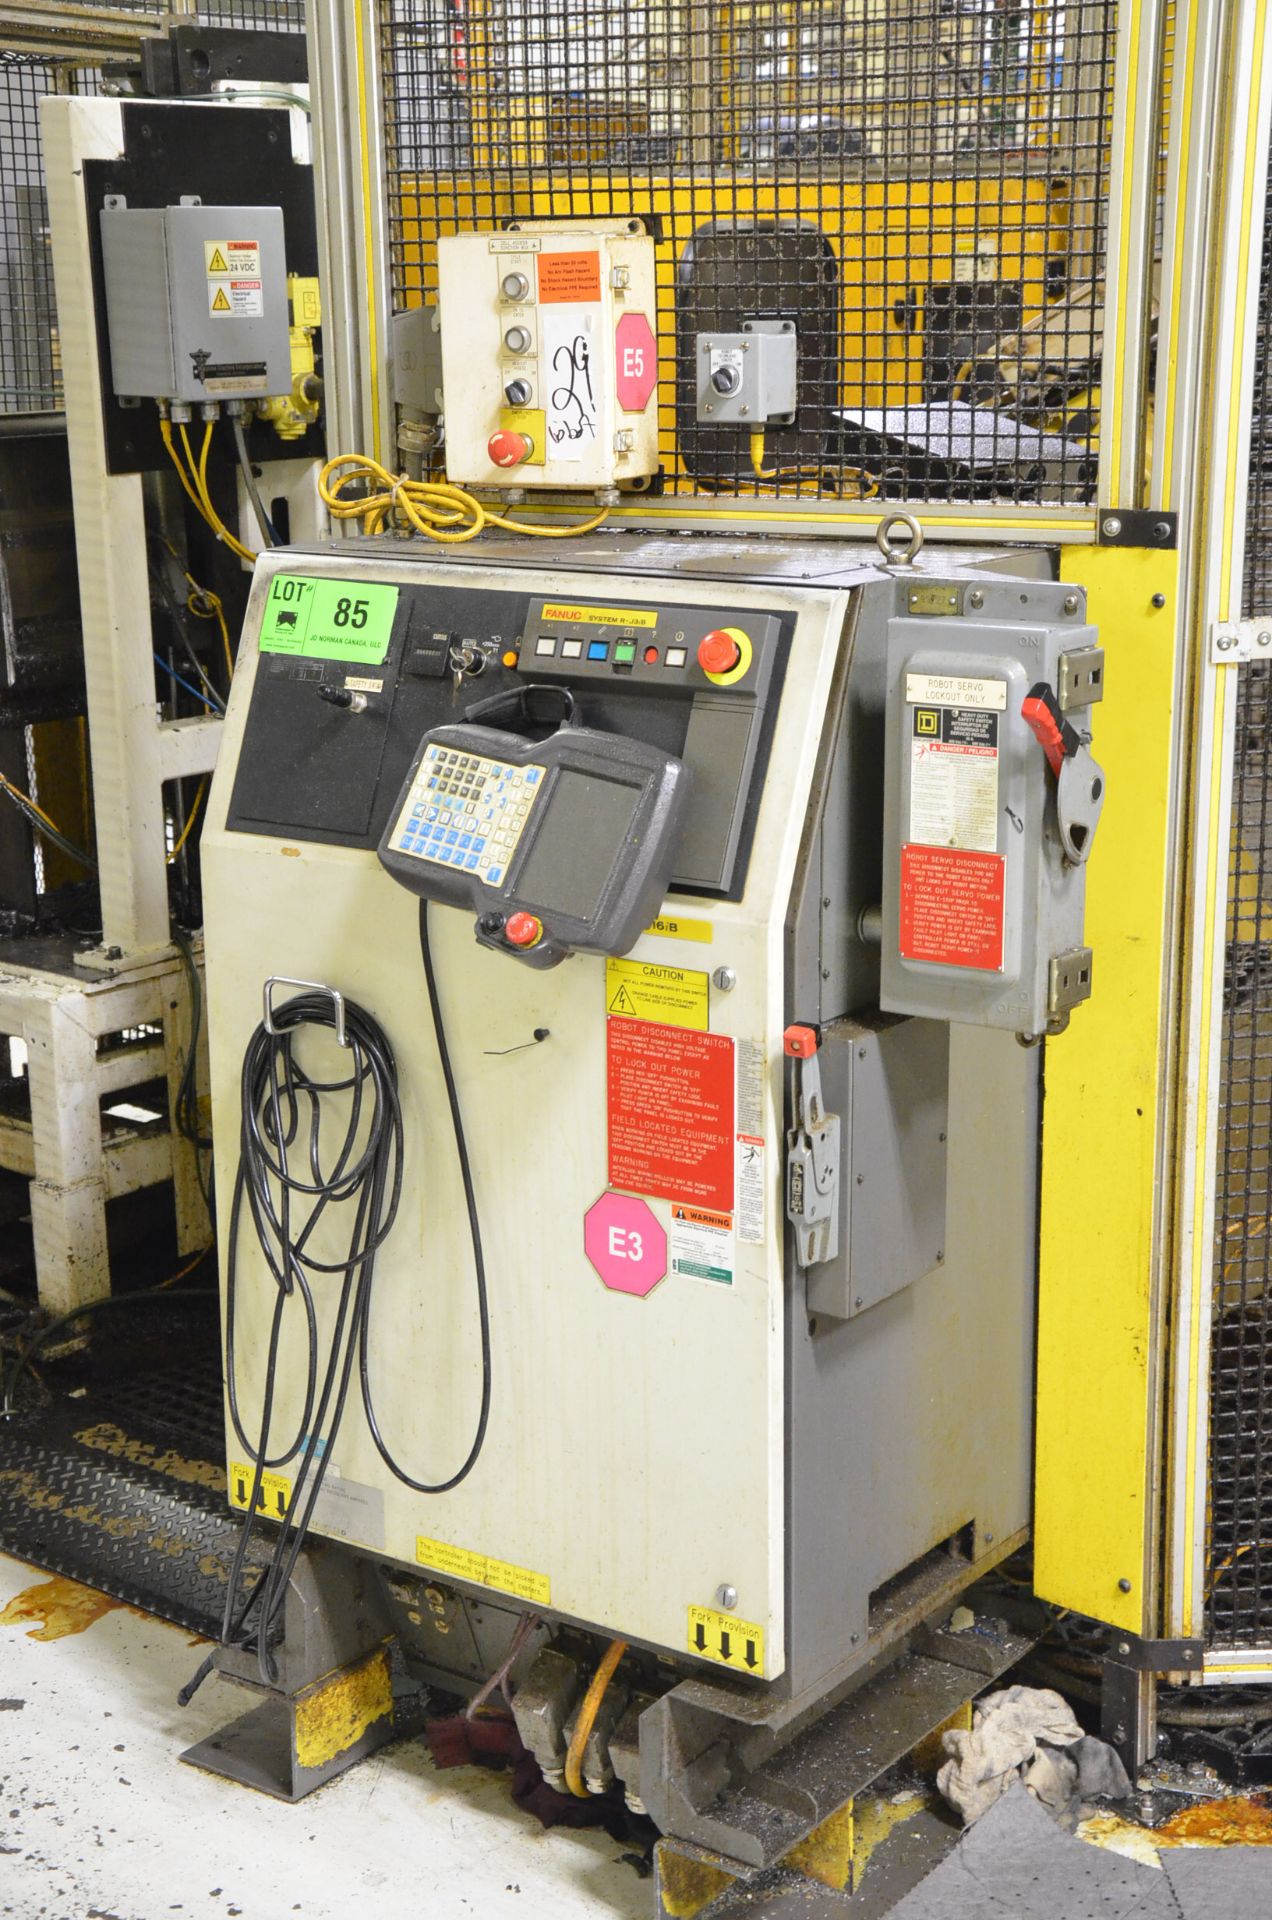 FANUC (2005) M-16IB 6-AXIS PICK AND PLACE ROBOT WITH FANUC SYSTEM R-J3-IB CONTROLLER, DIGITAL